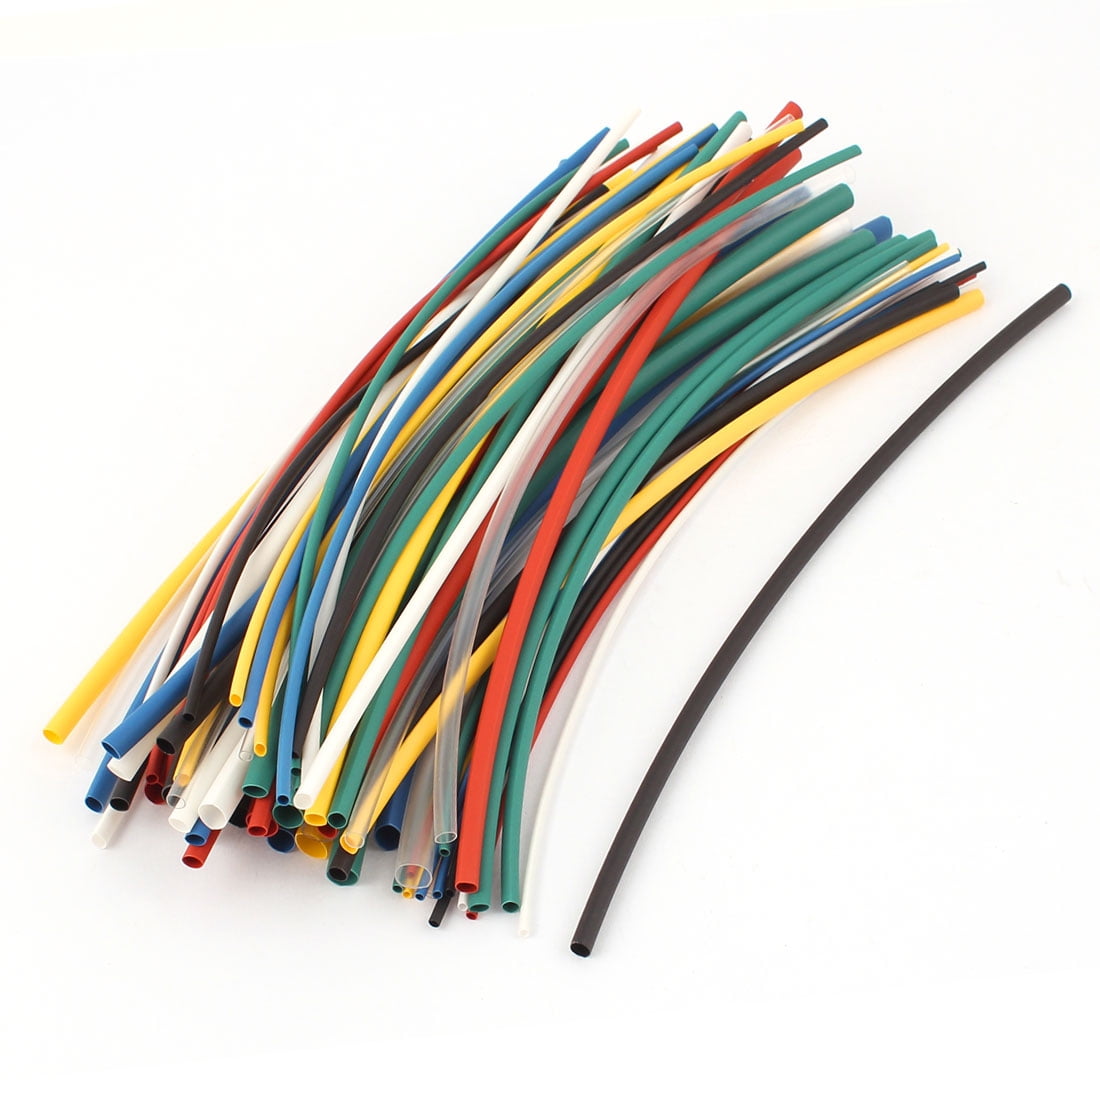 Details about   170PCS Heat Shrink Tubing Cable Tube Sleeving Wire Wrap Electrical Heatshrink BU 